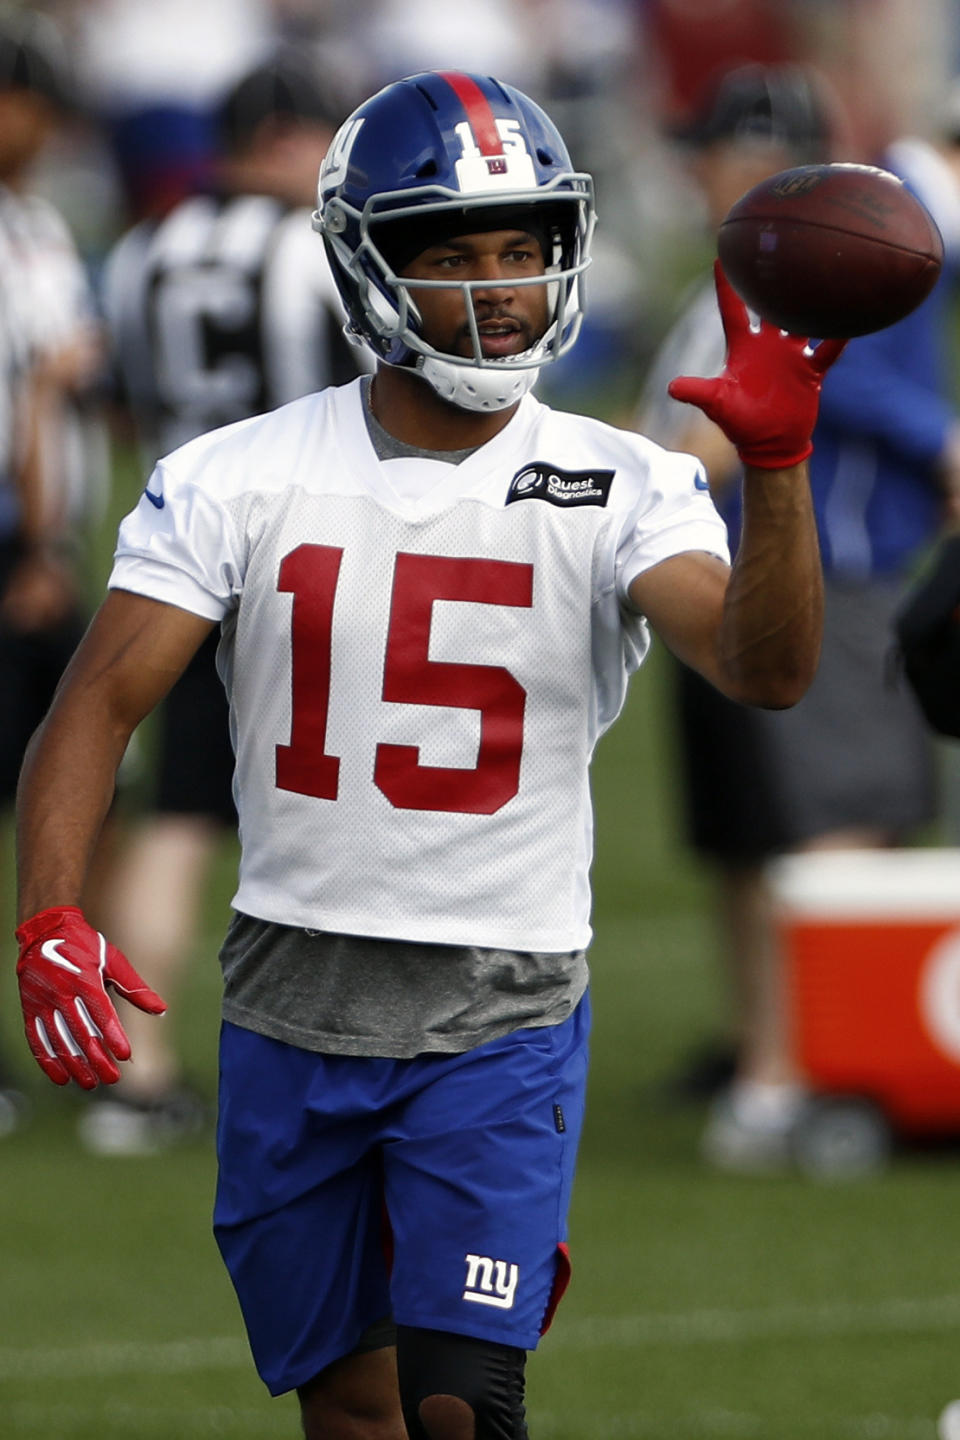 FILE - In this May 20, 2019, file photo, New York Giants wide receiver Golden Tate makes a catch during an NFL football practice in East Rutherford, N.J. Golden Tate has had the appeal of his four-game suspension for a violation of the NFL's policy on performance enhancers turned down. The decision by an independent arbiter was announced Tuesday, Aug. 13, 2019, and means the 10-year-veteran will miss the first four games of the regular season, starting with Dallas on Sept. 8. (AP Photo/Adam Hunger, File)